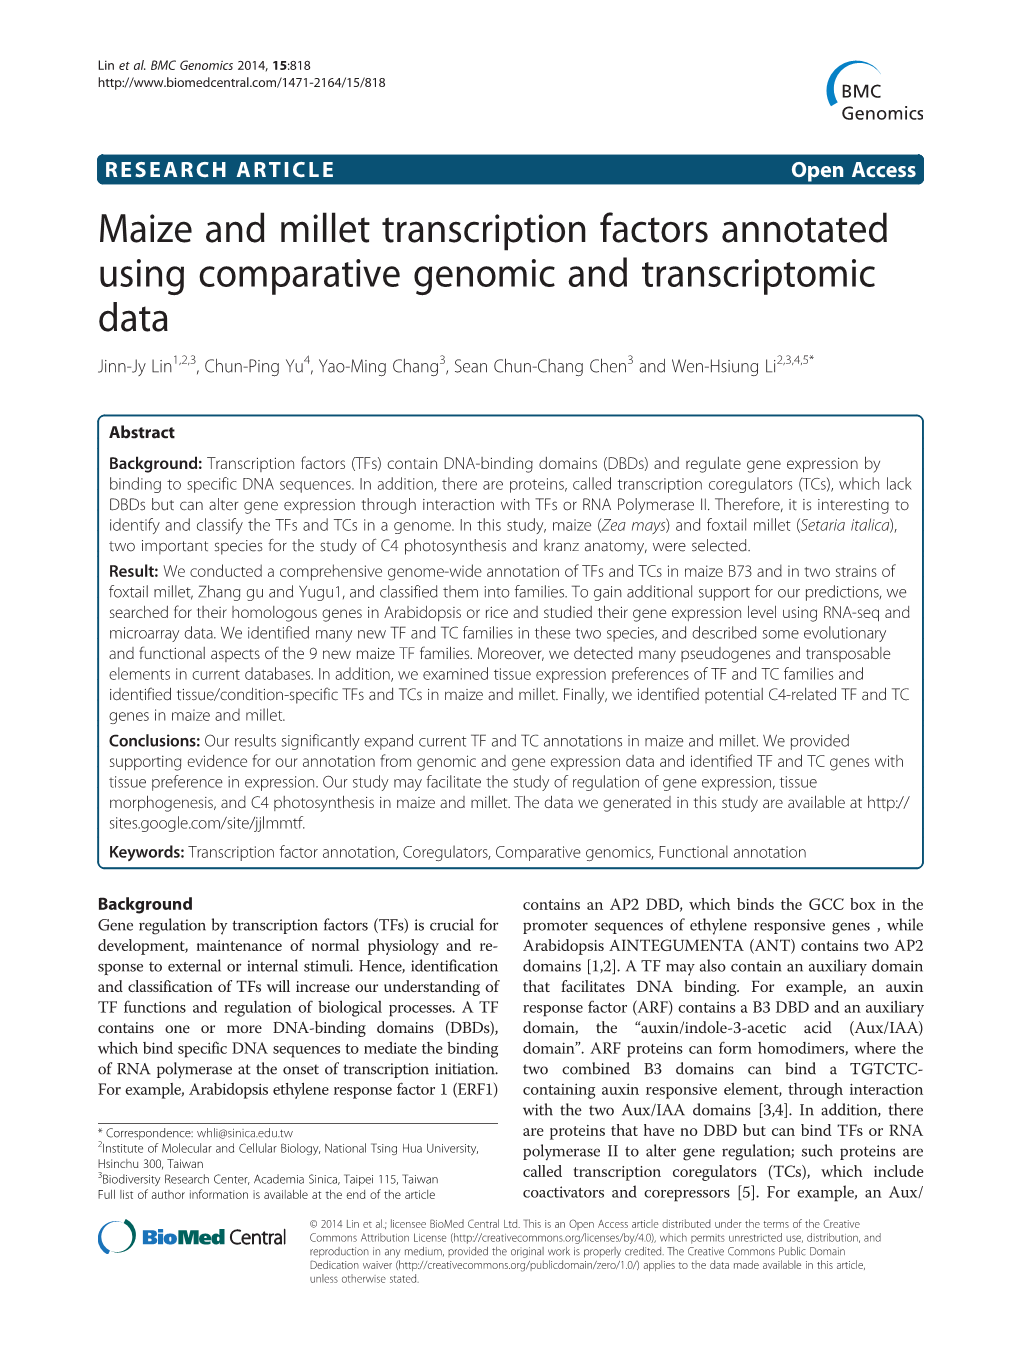 Maize and Millet Transcription Factors Annotated Using Comparative